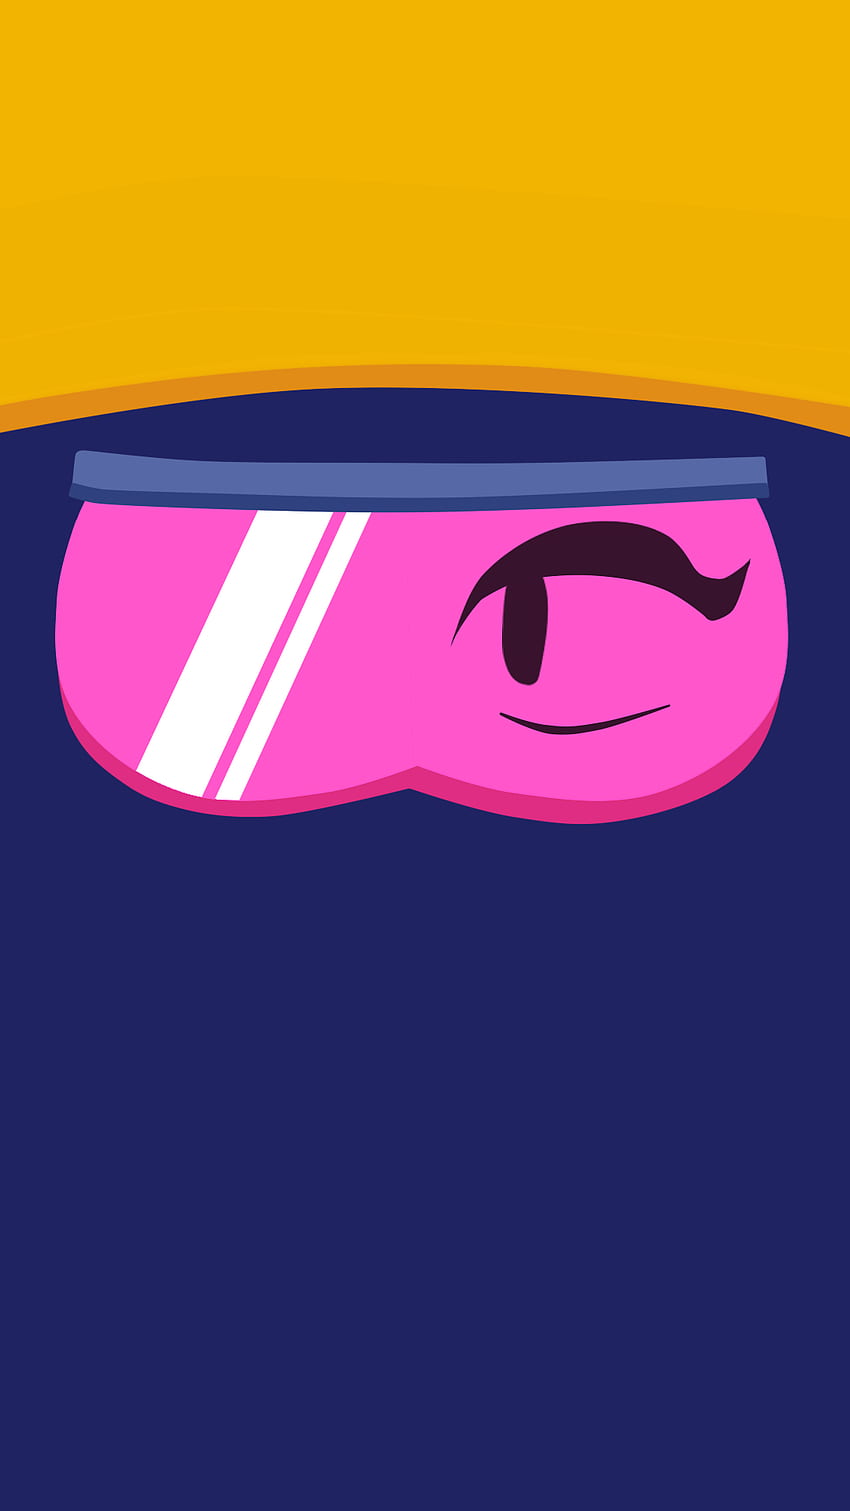 JACKY ! And this is my 3 brawlstars ! My objective is to make with all the brawlers. You think you can handle it?) Write your suggestions, who to draw next! HD phone wallpaper